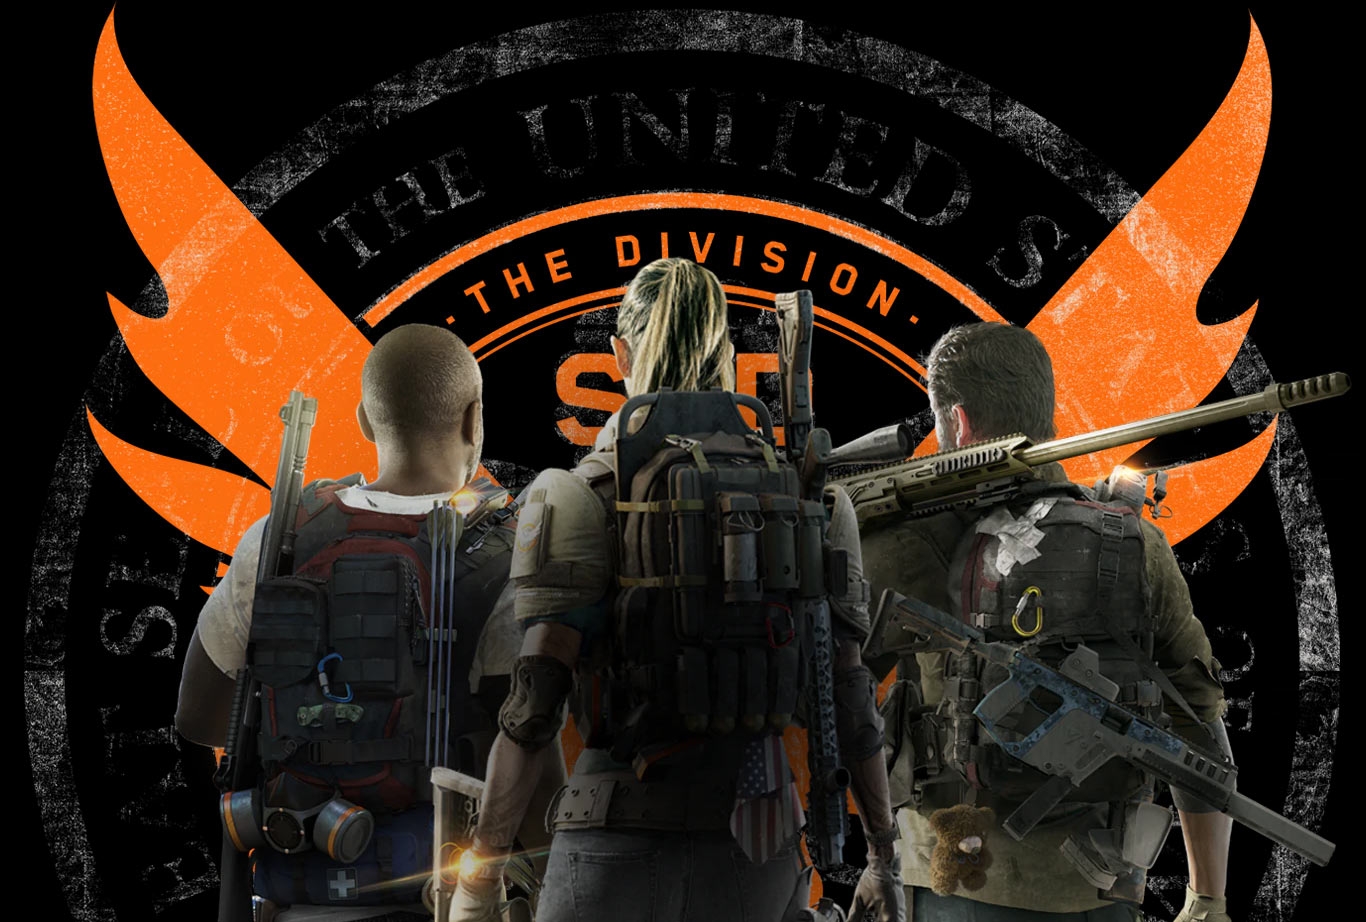 The division steam фото 63